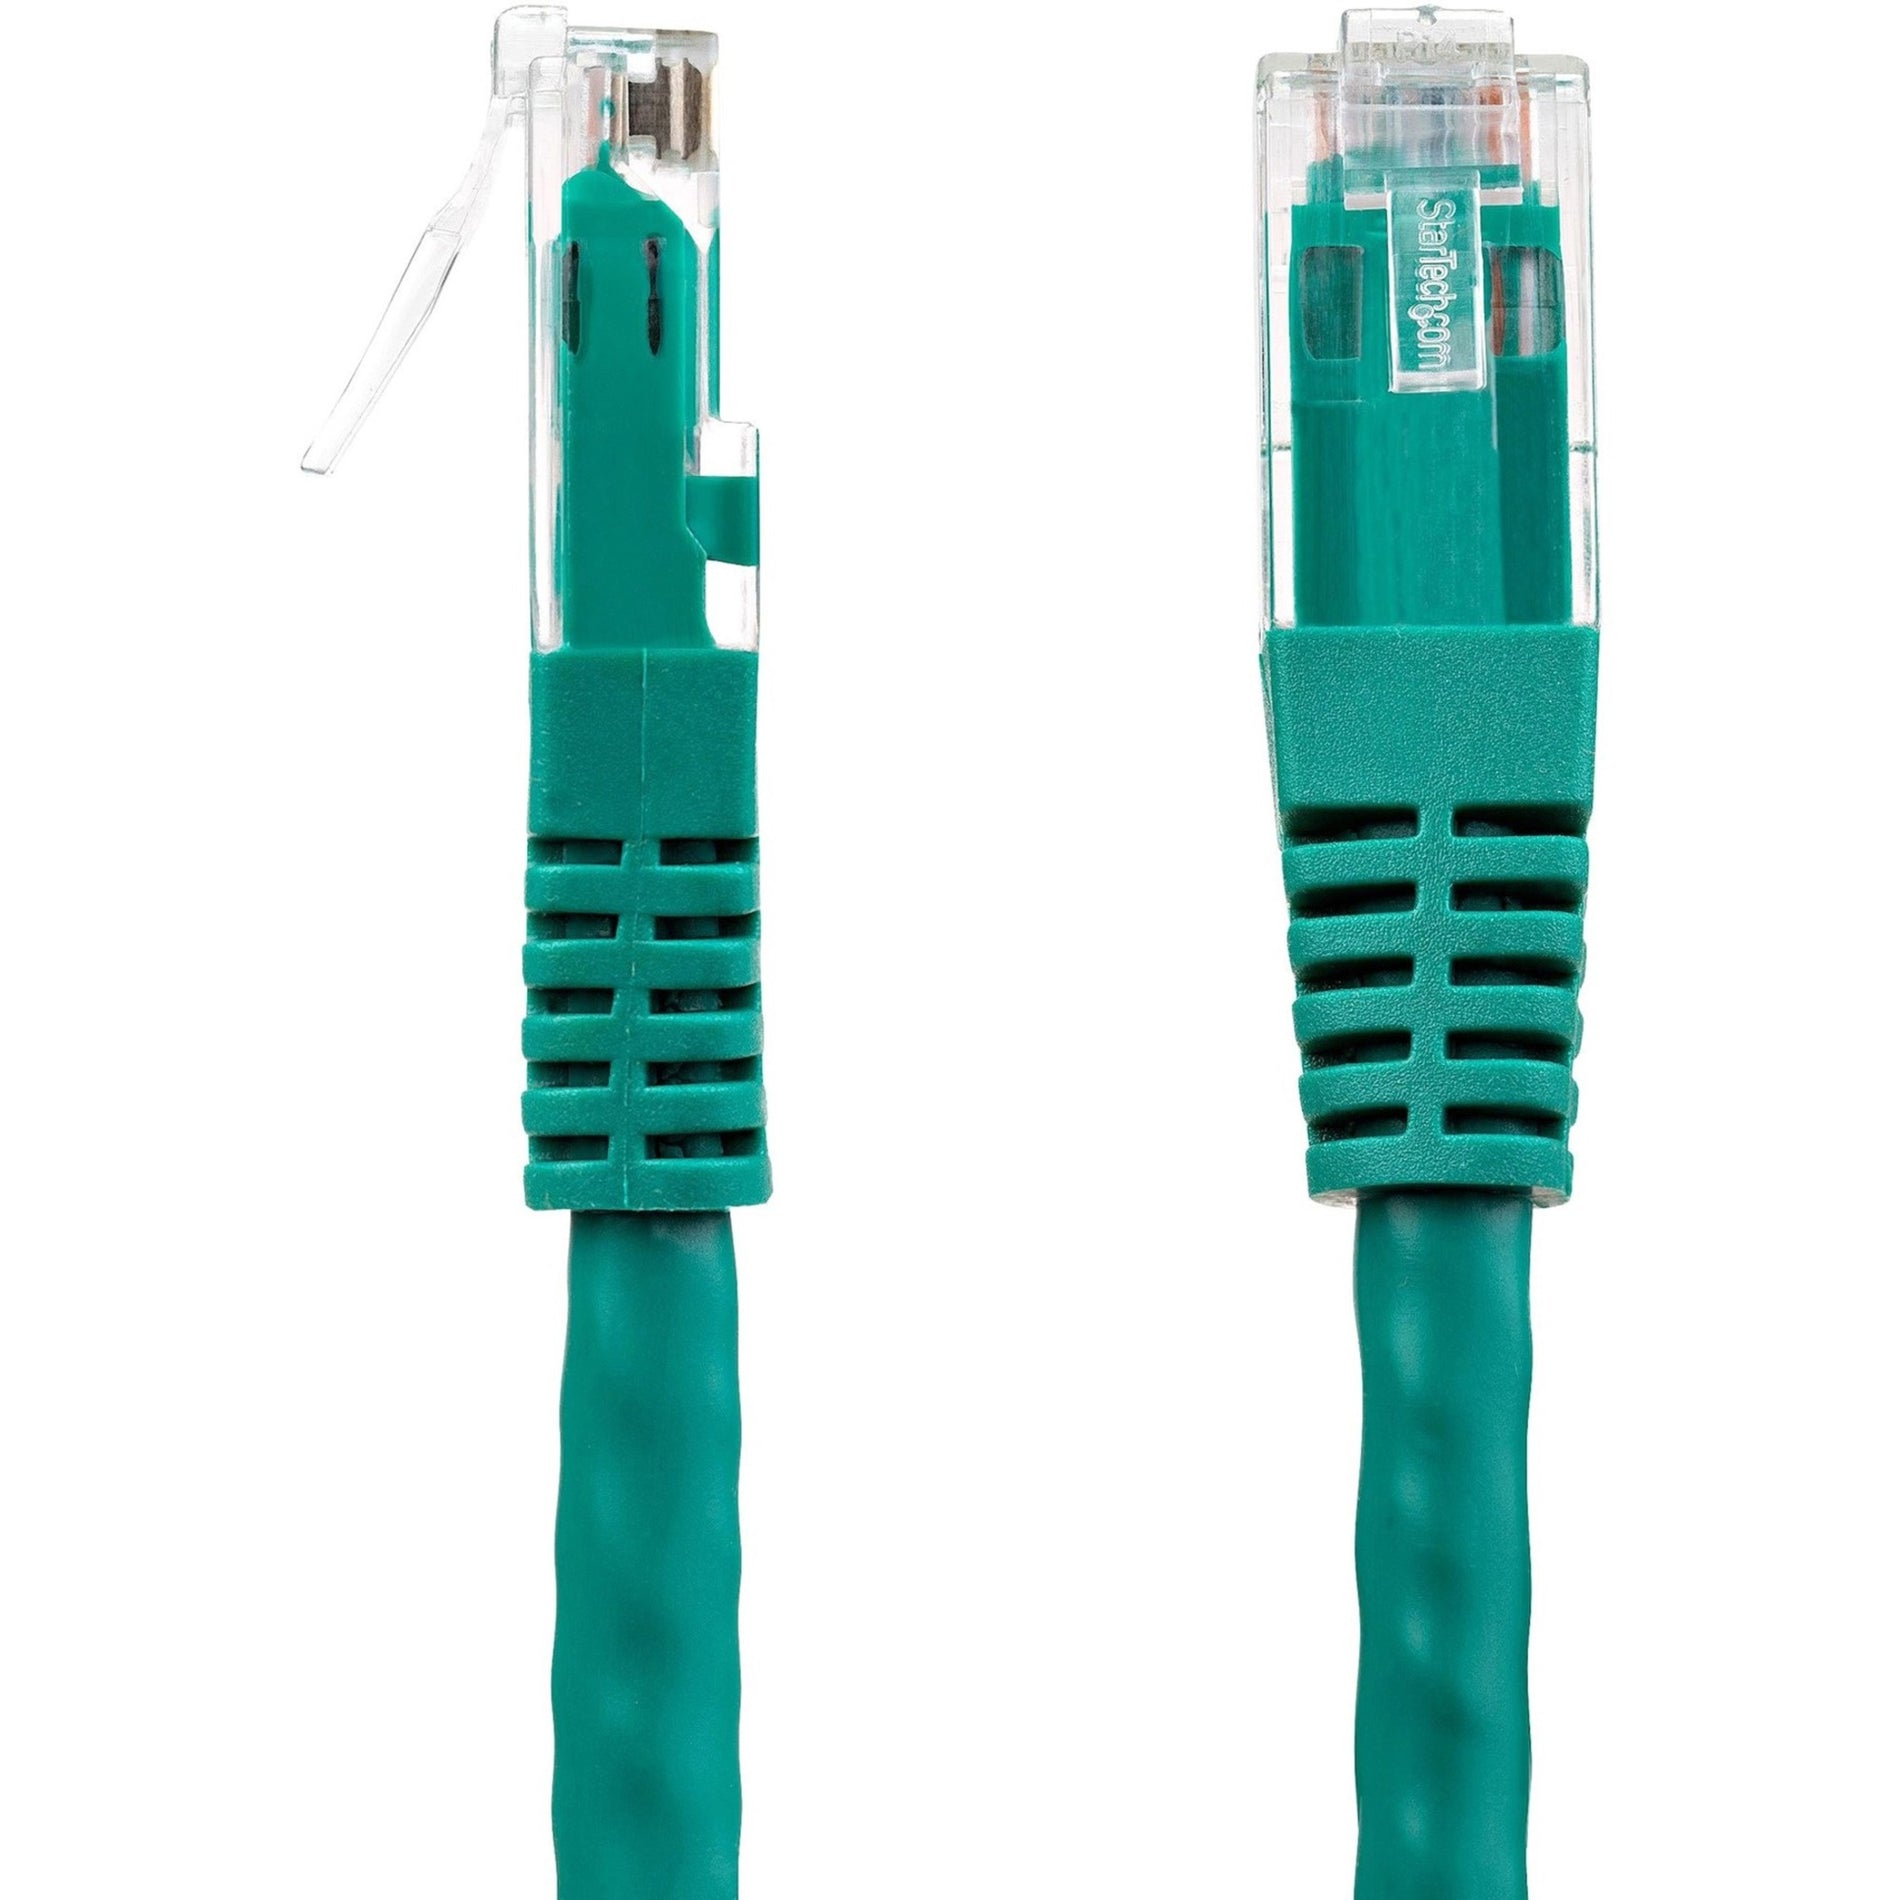 StarTech.com C6PATCH3GN 3ft Green Molded Cat6 UTP Patch Cable ETL Verified, Corrosion Resistant, PoE, Stranded, Molded, Strain Relief, Damage Resistant